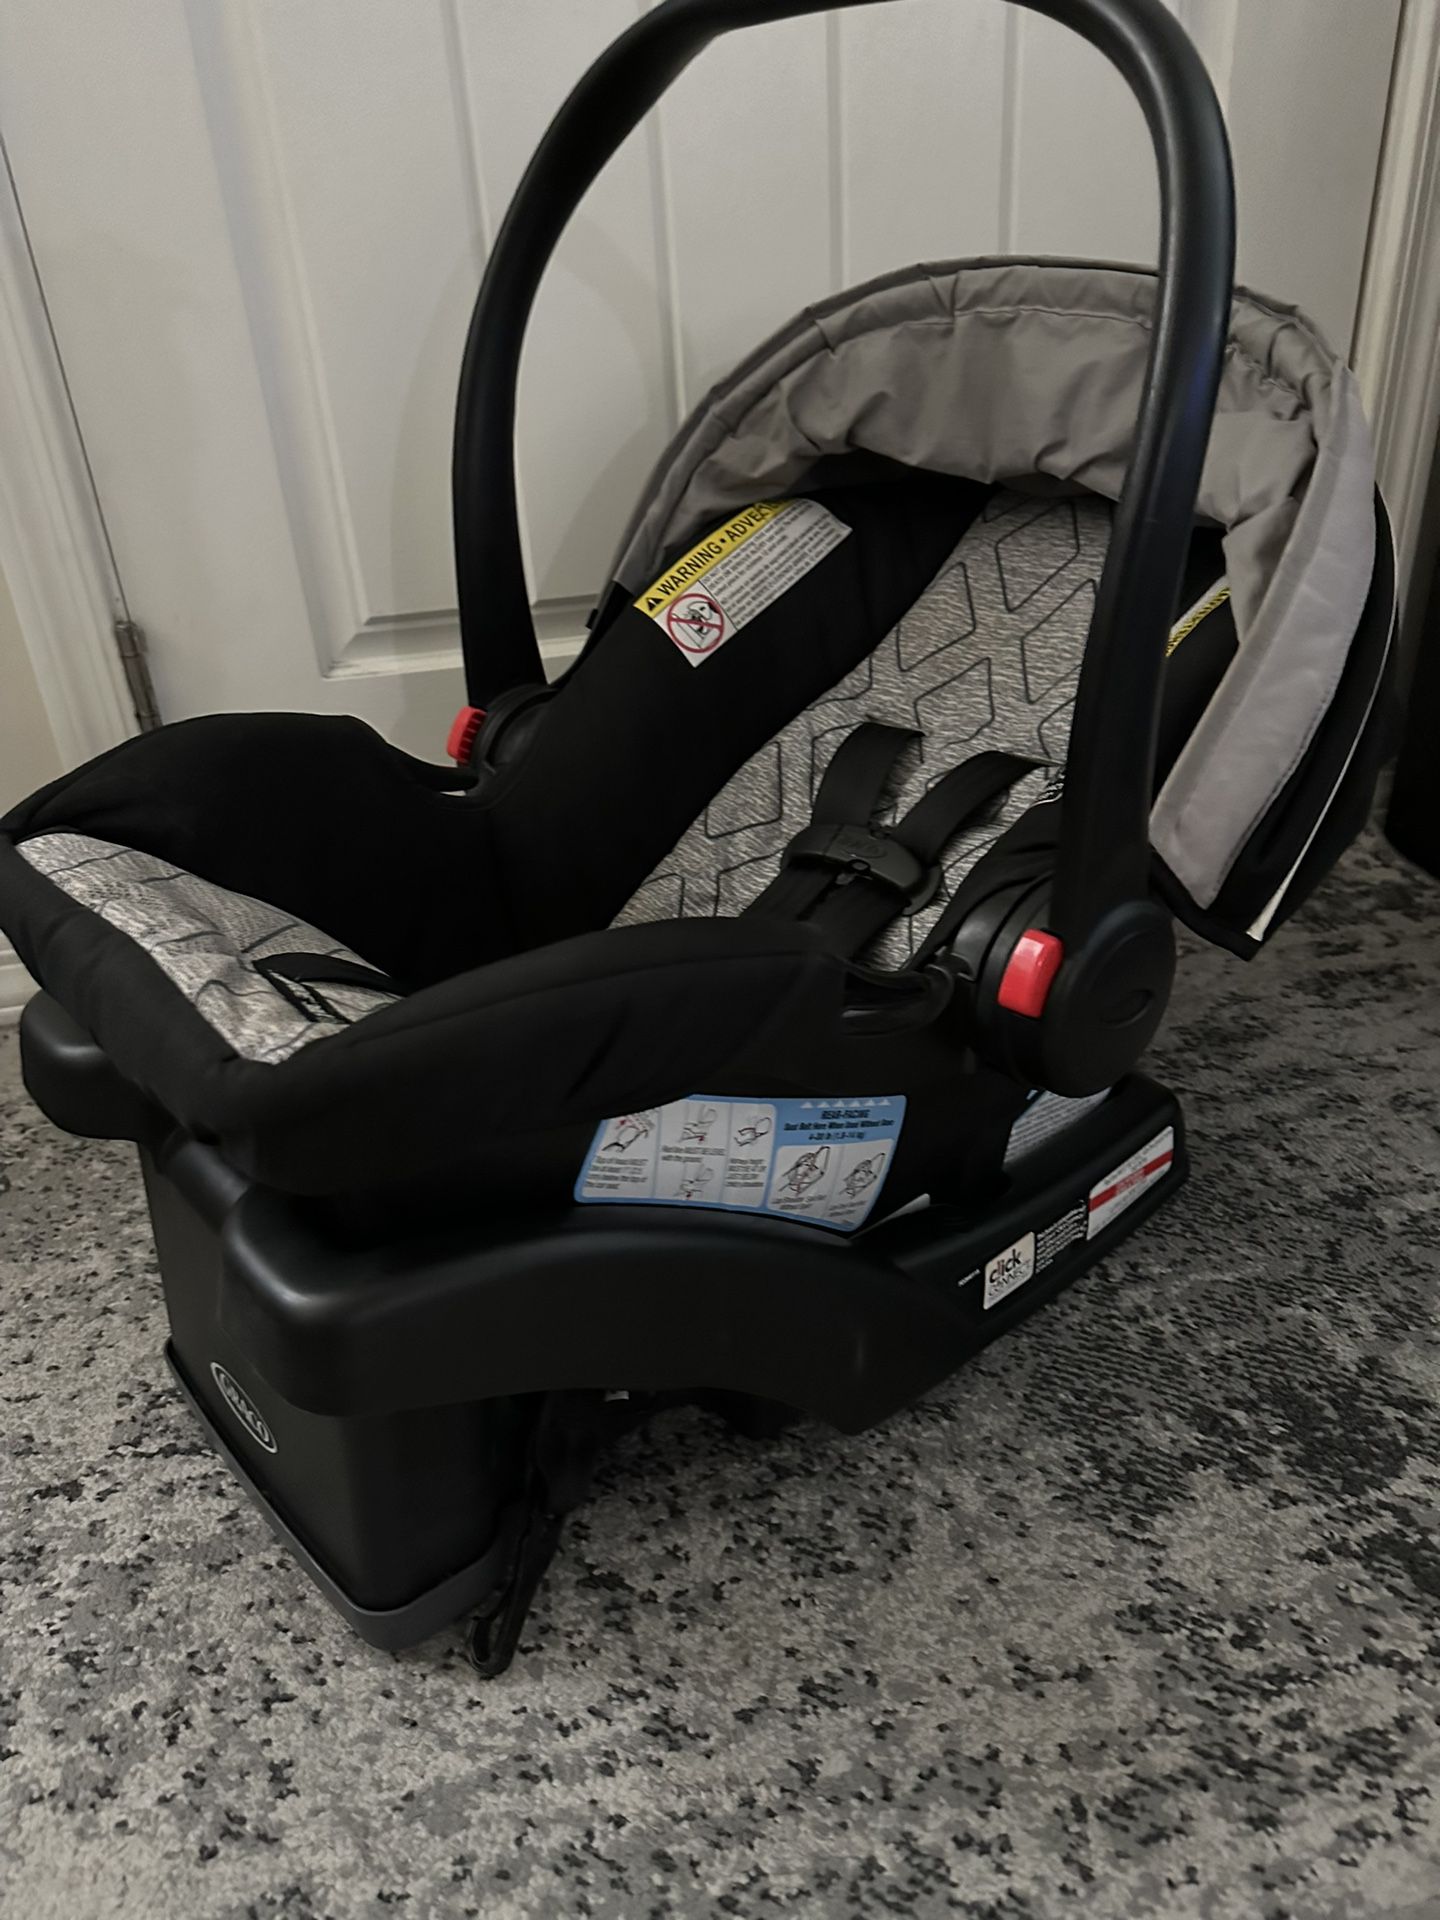 Graco Stroller, Car Seat & 2 Car Seat Bases Combo